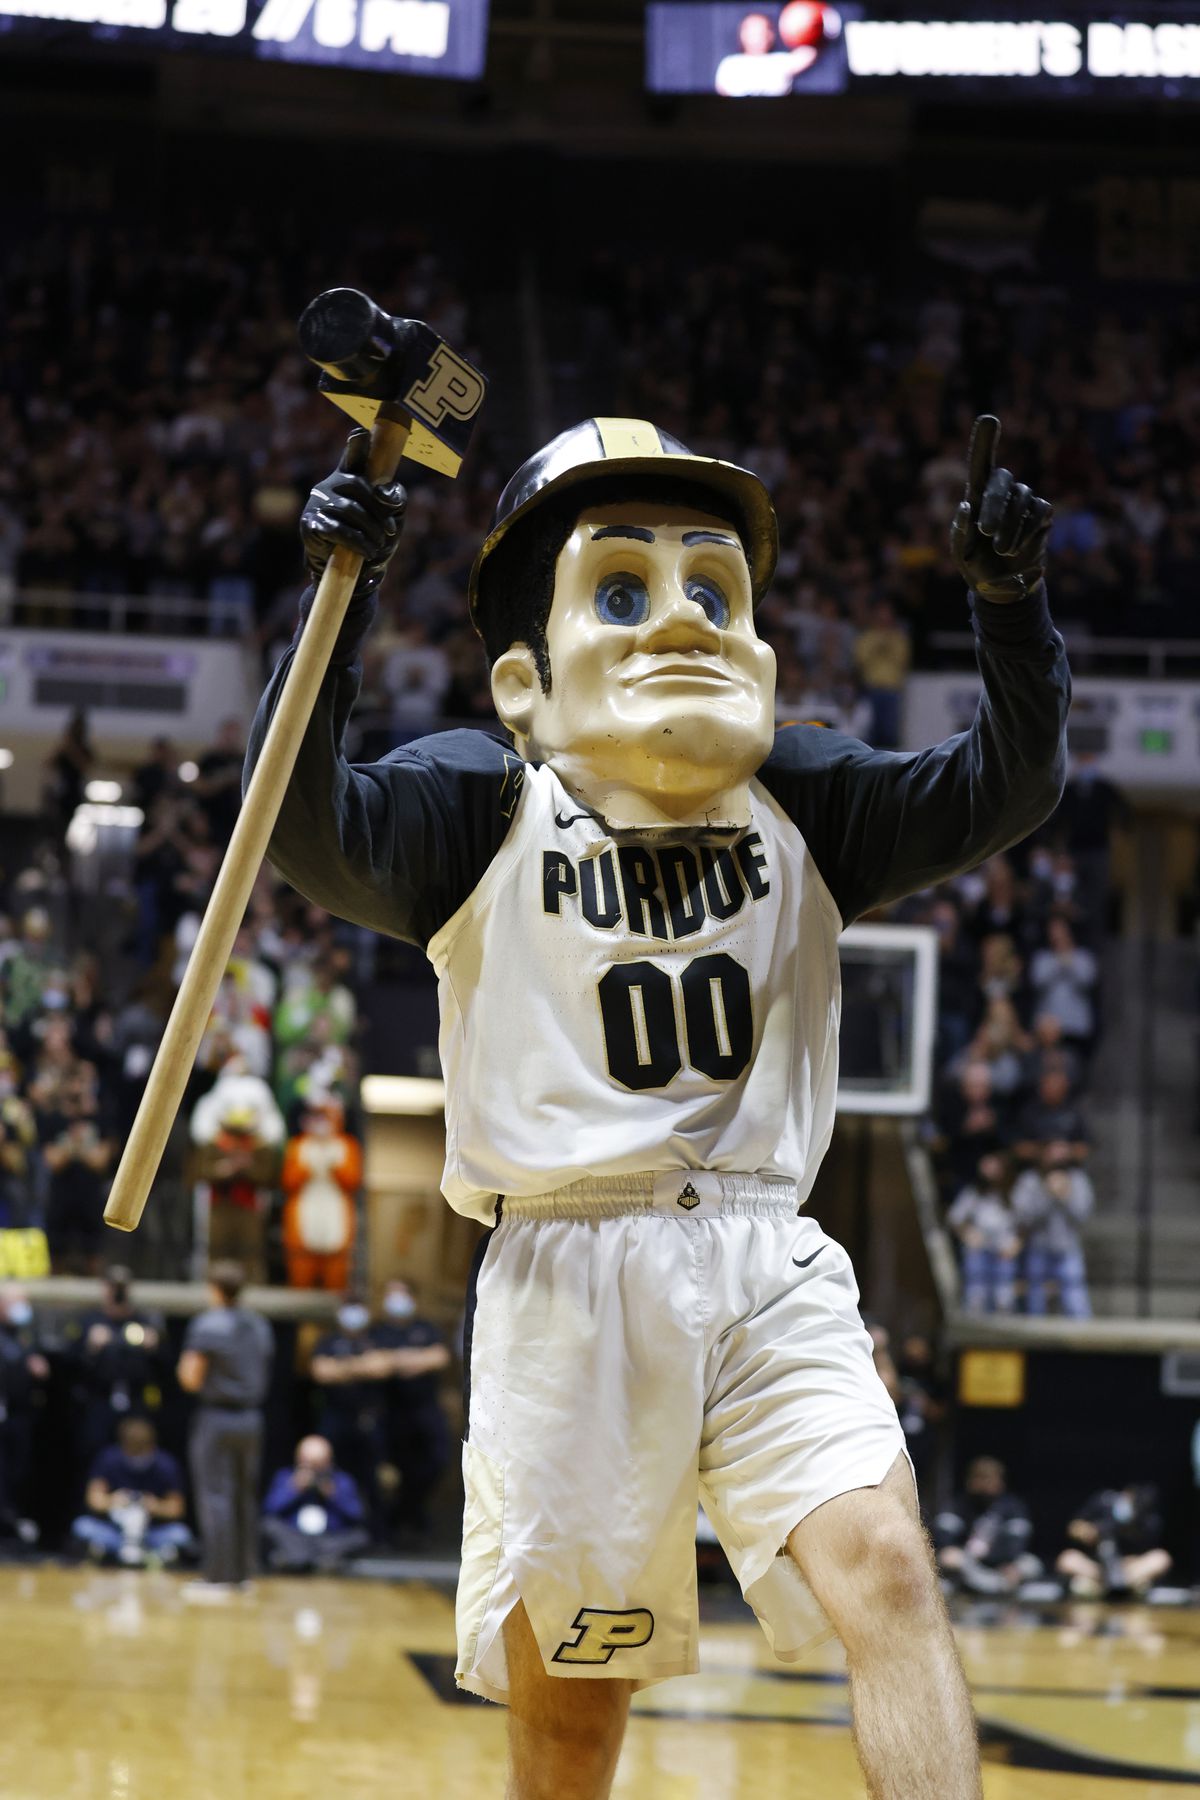 COLLEGE BASKETBALL: NOV 16 Wright State at Purdue